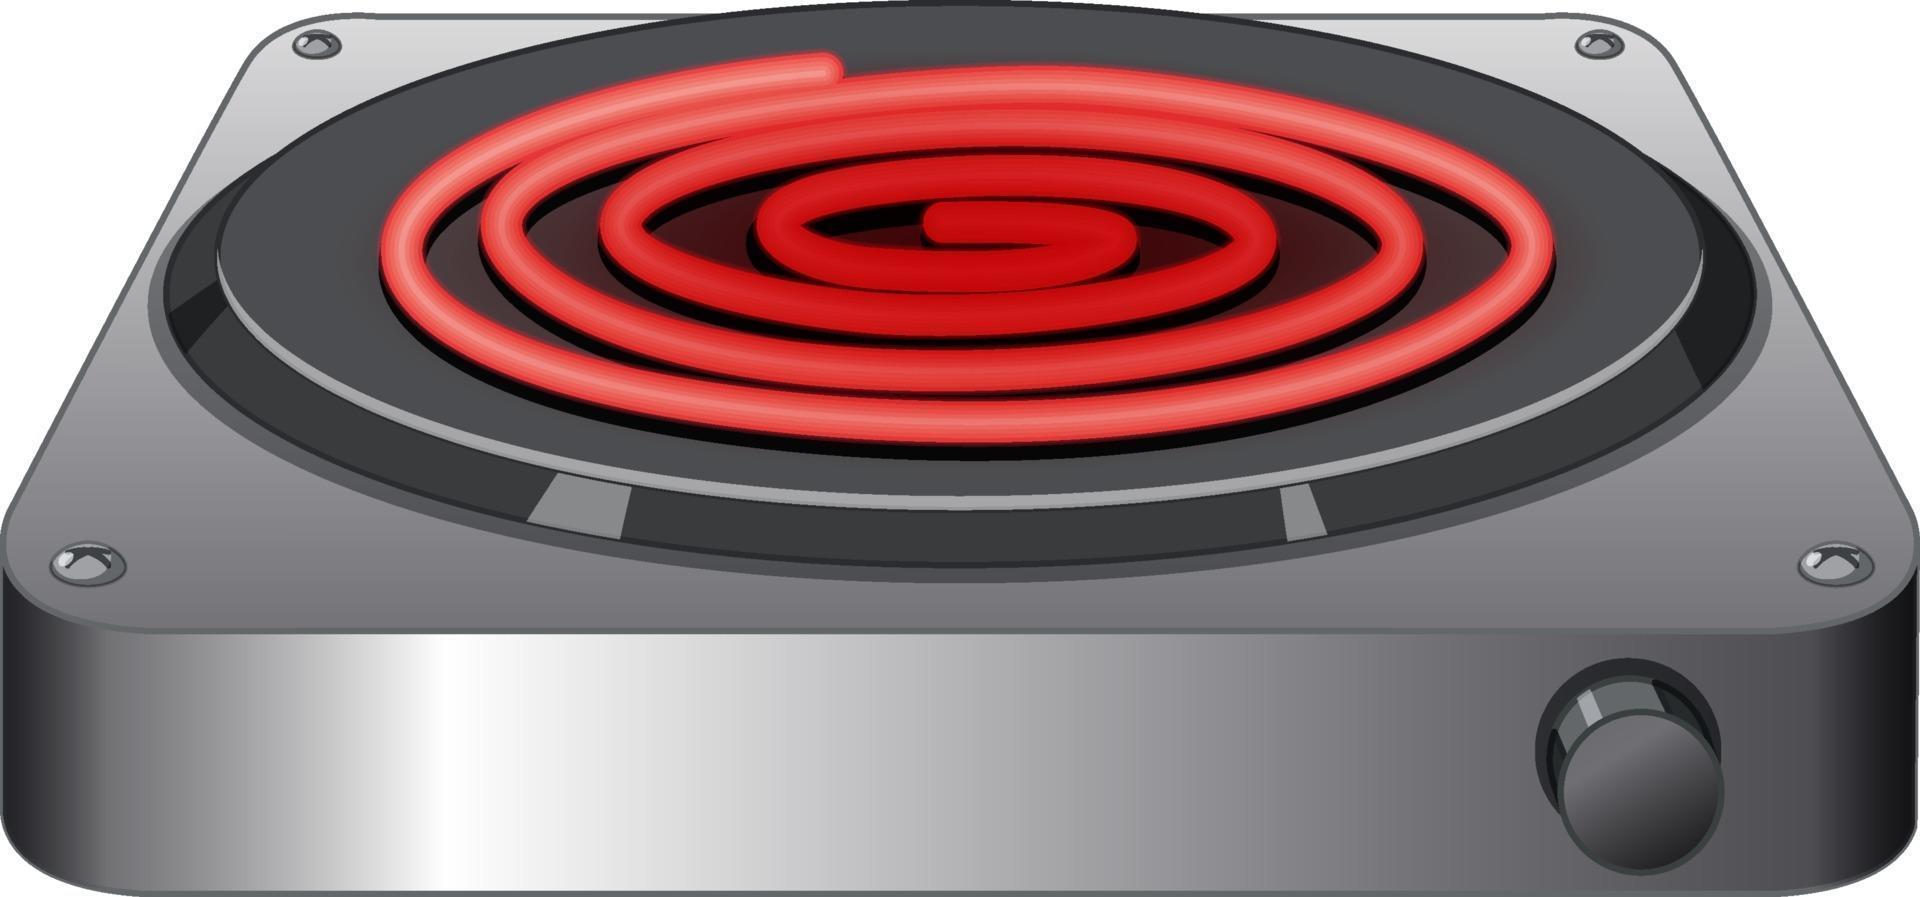 Infrared Stove in cartoon style on white background vector